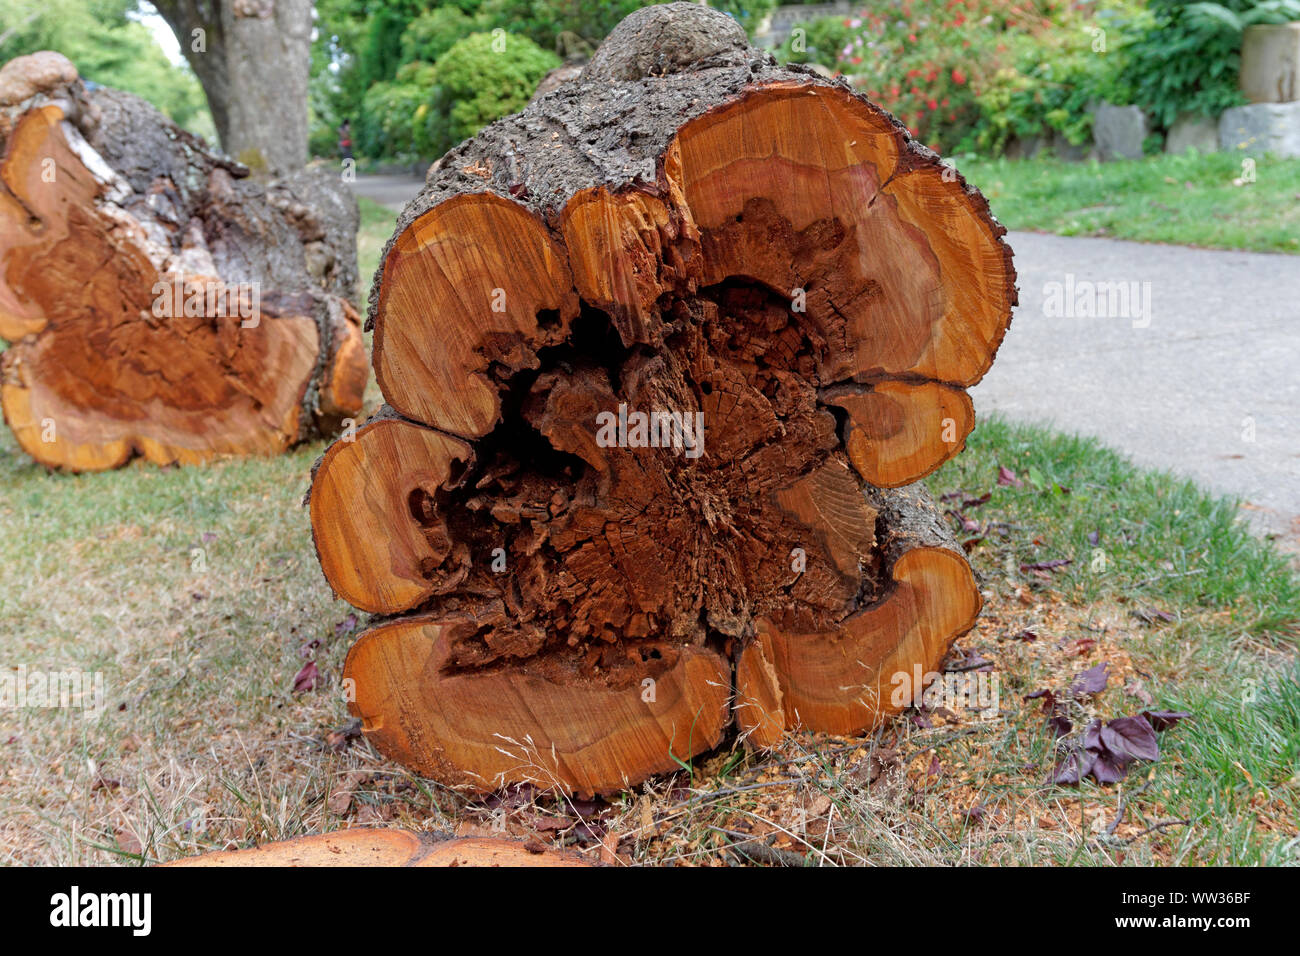 Cross section of a felled ornamental plum tree trunk lying on the ground showing heart rot fungal disease, Vancouver, BC, Canada Stock Photo